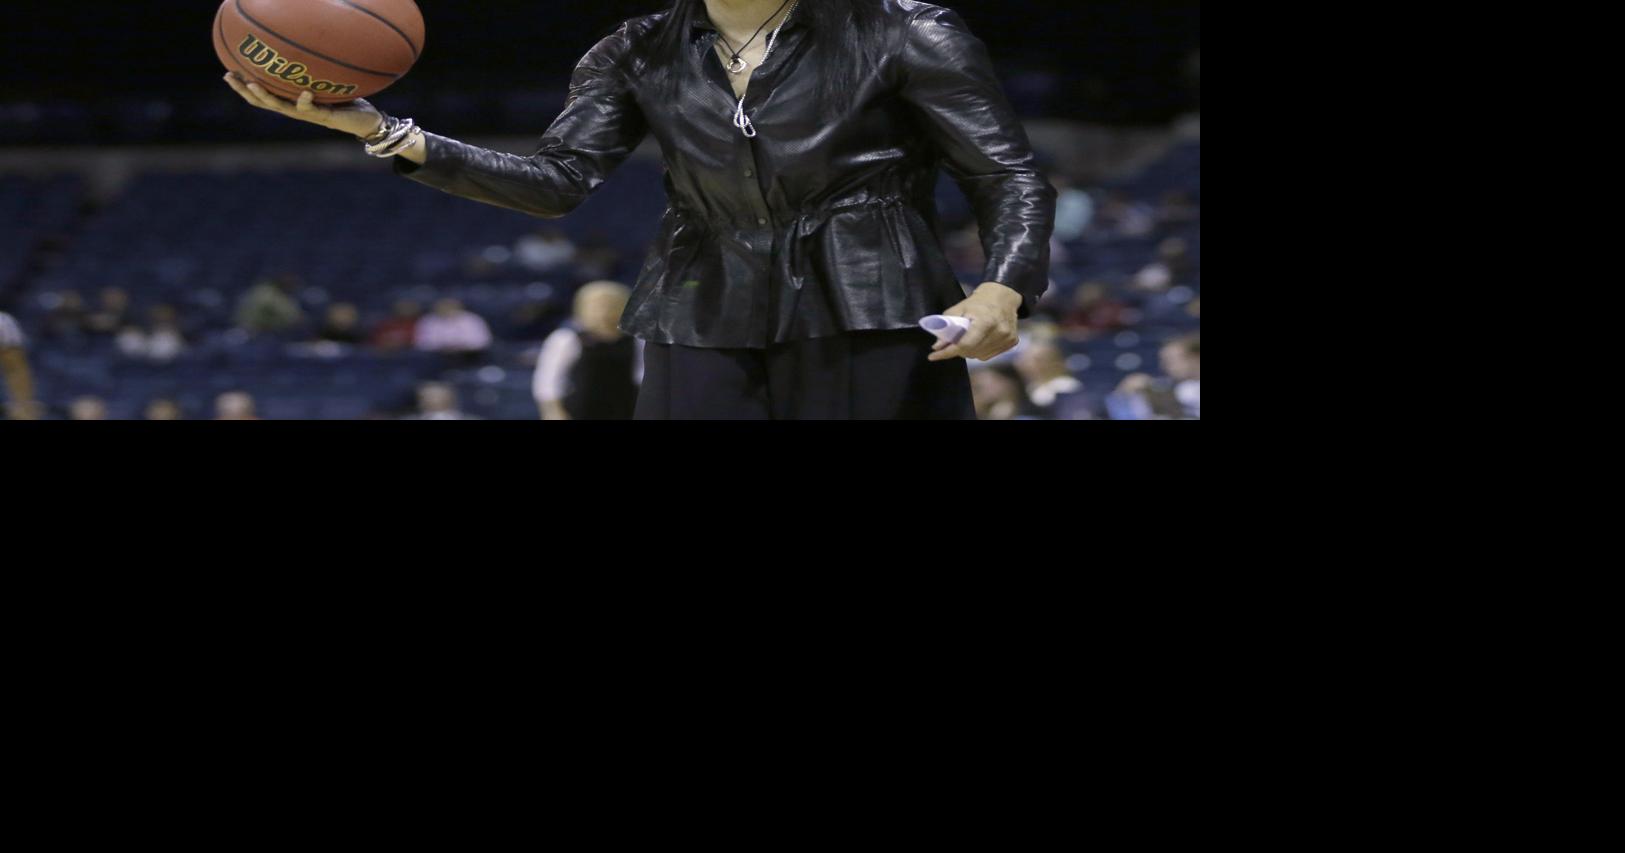 Look: Dawn Staley's Sideline Outfit Going Viral On Sunday - The Spun:  What's Trending In The Sports World Today